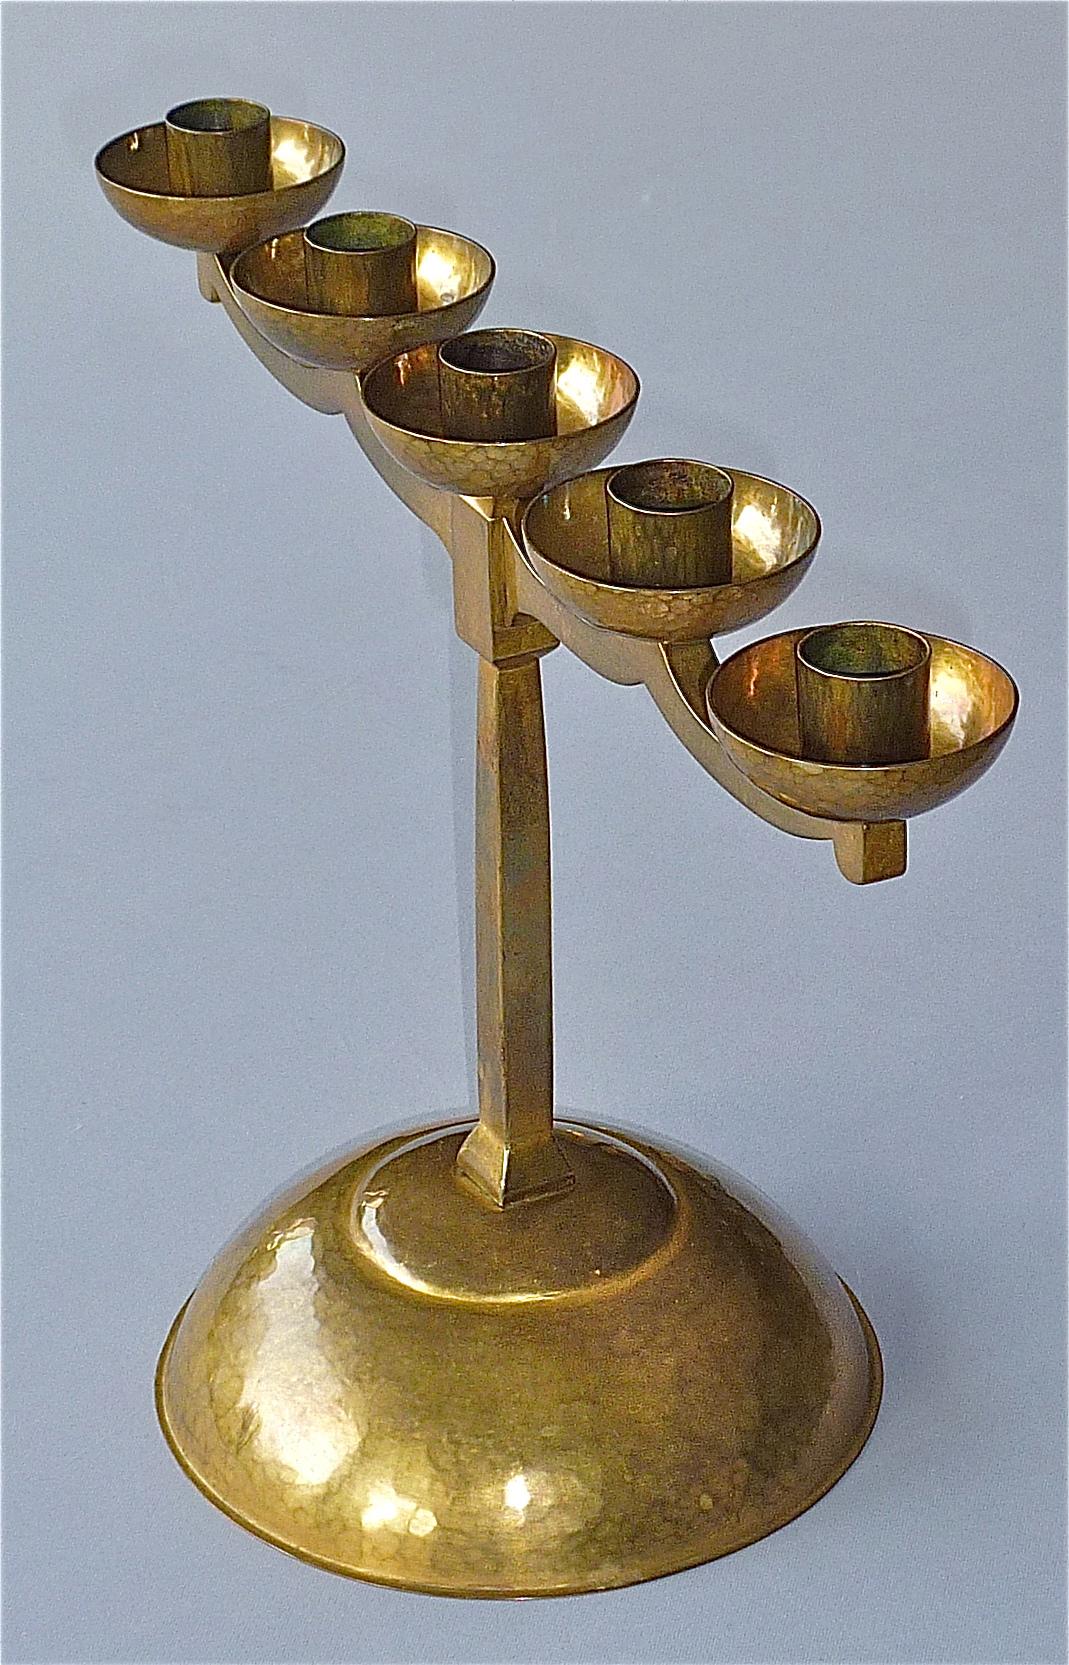 Early 20th Century Hand-Chased Brass Bauhaus Art Deco Candle Holder Signed Bohde 1920s Candelabras For Sale